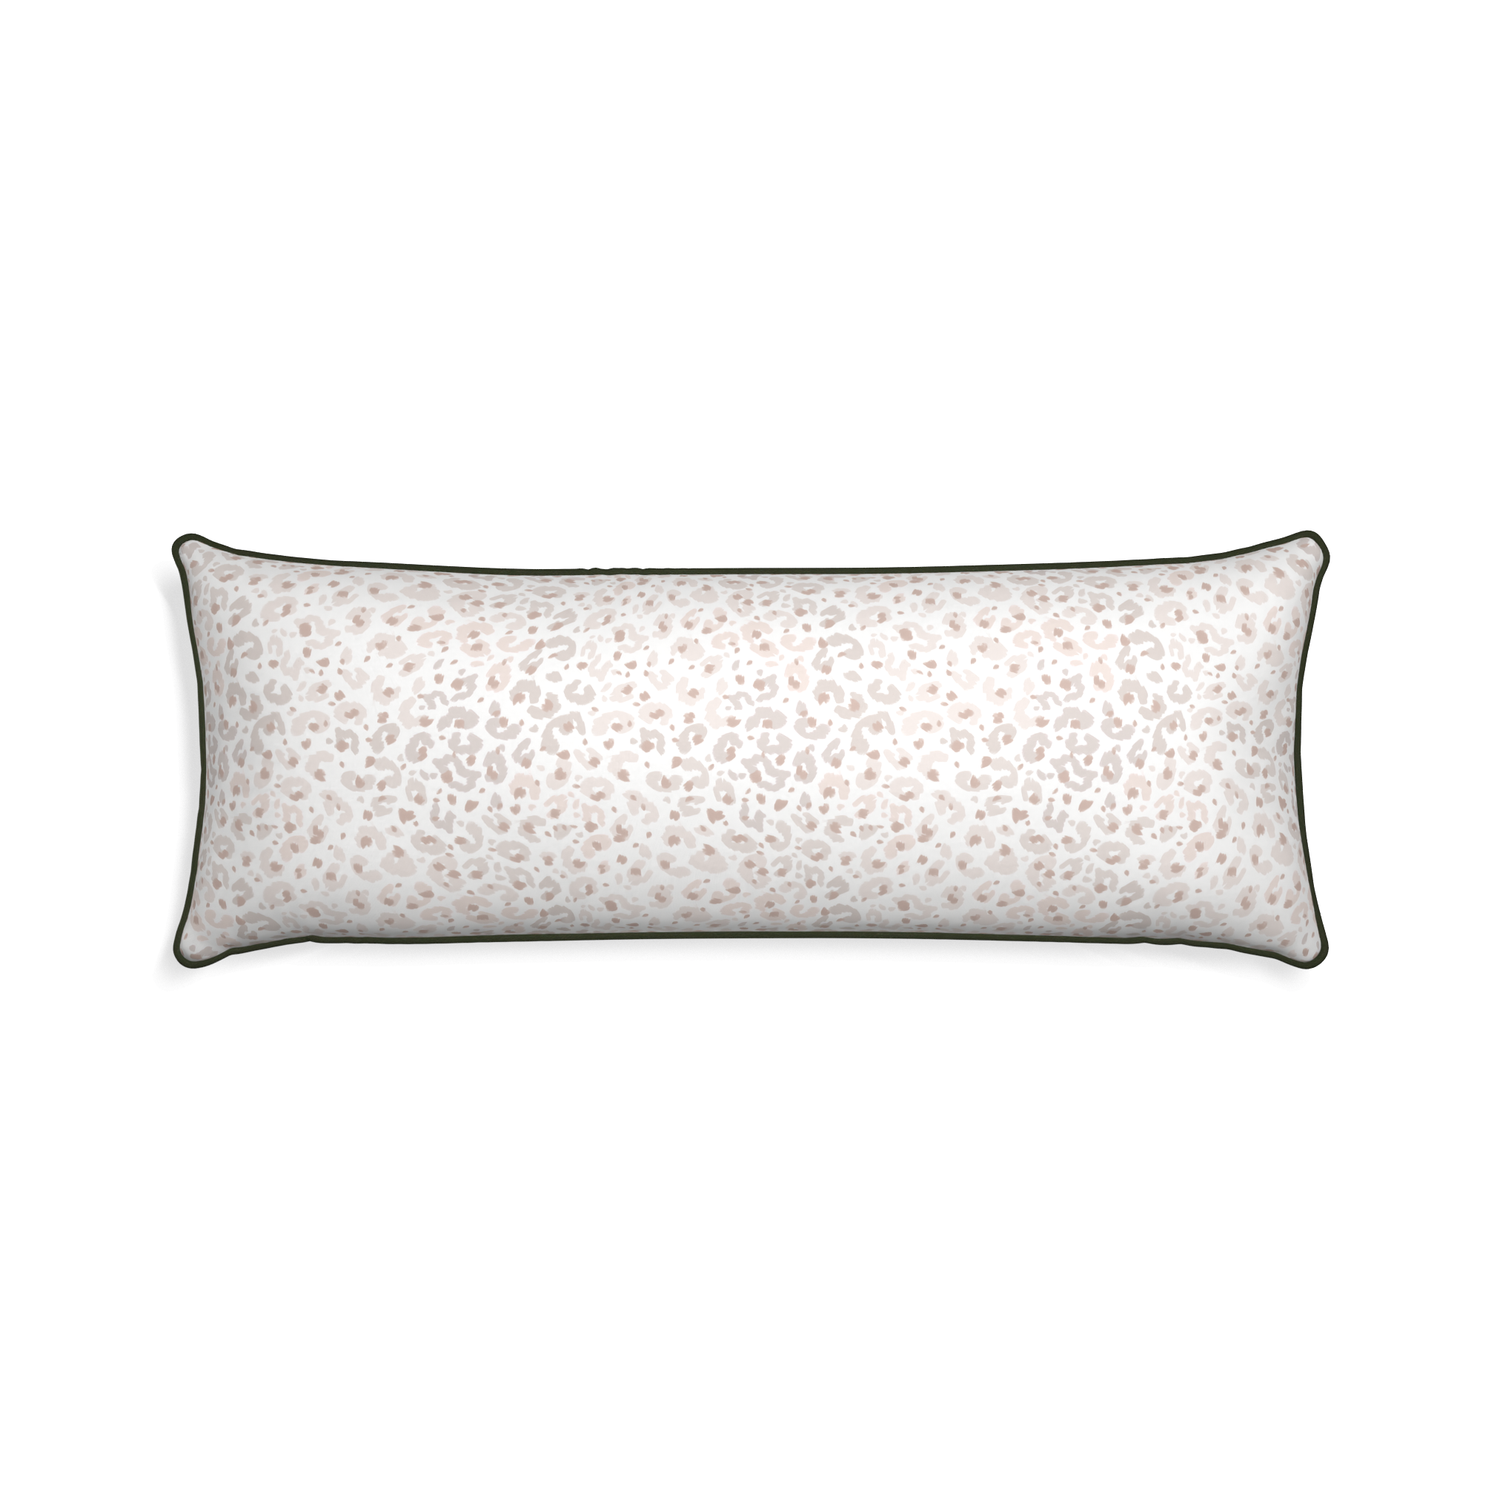 Xl-lumbar rosie custom beige animal printpillow with f piping on white background